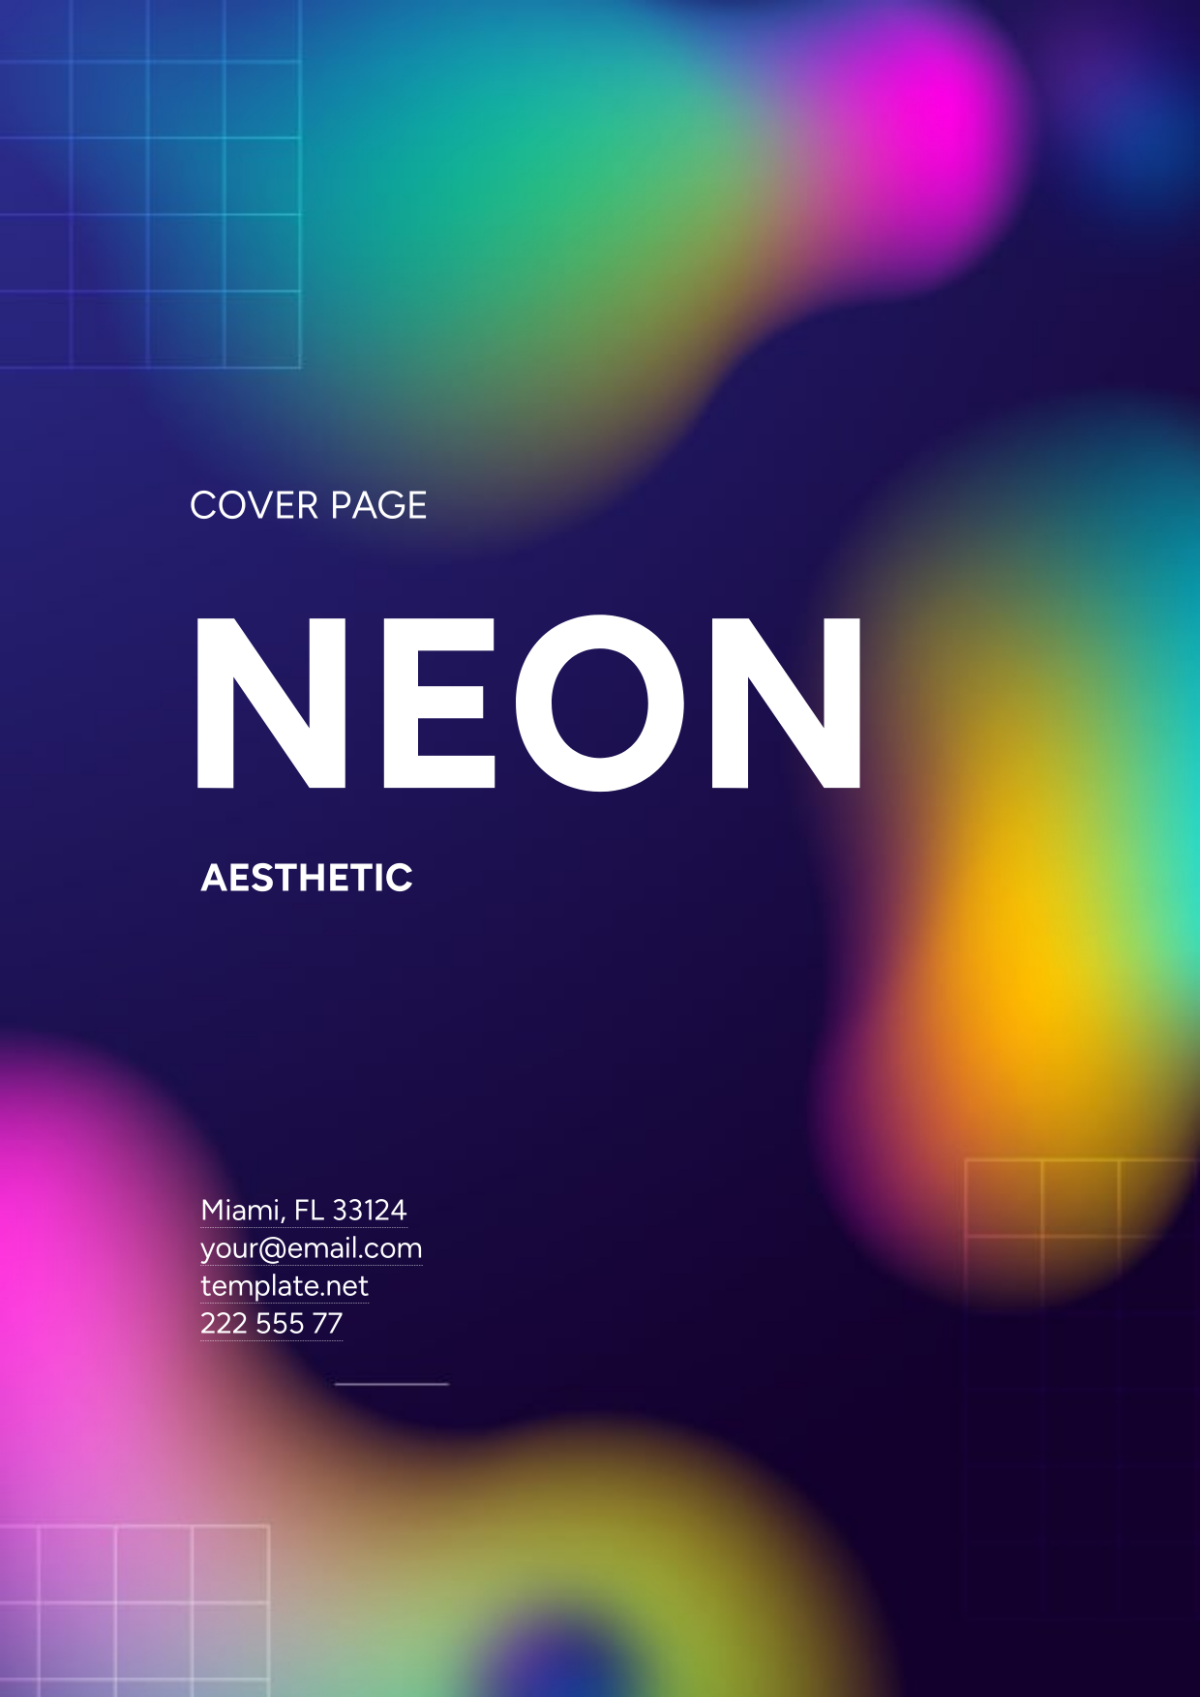 Neon Aesthetic Cover Page Template